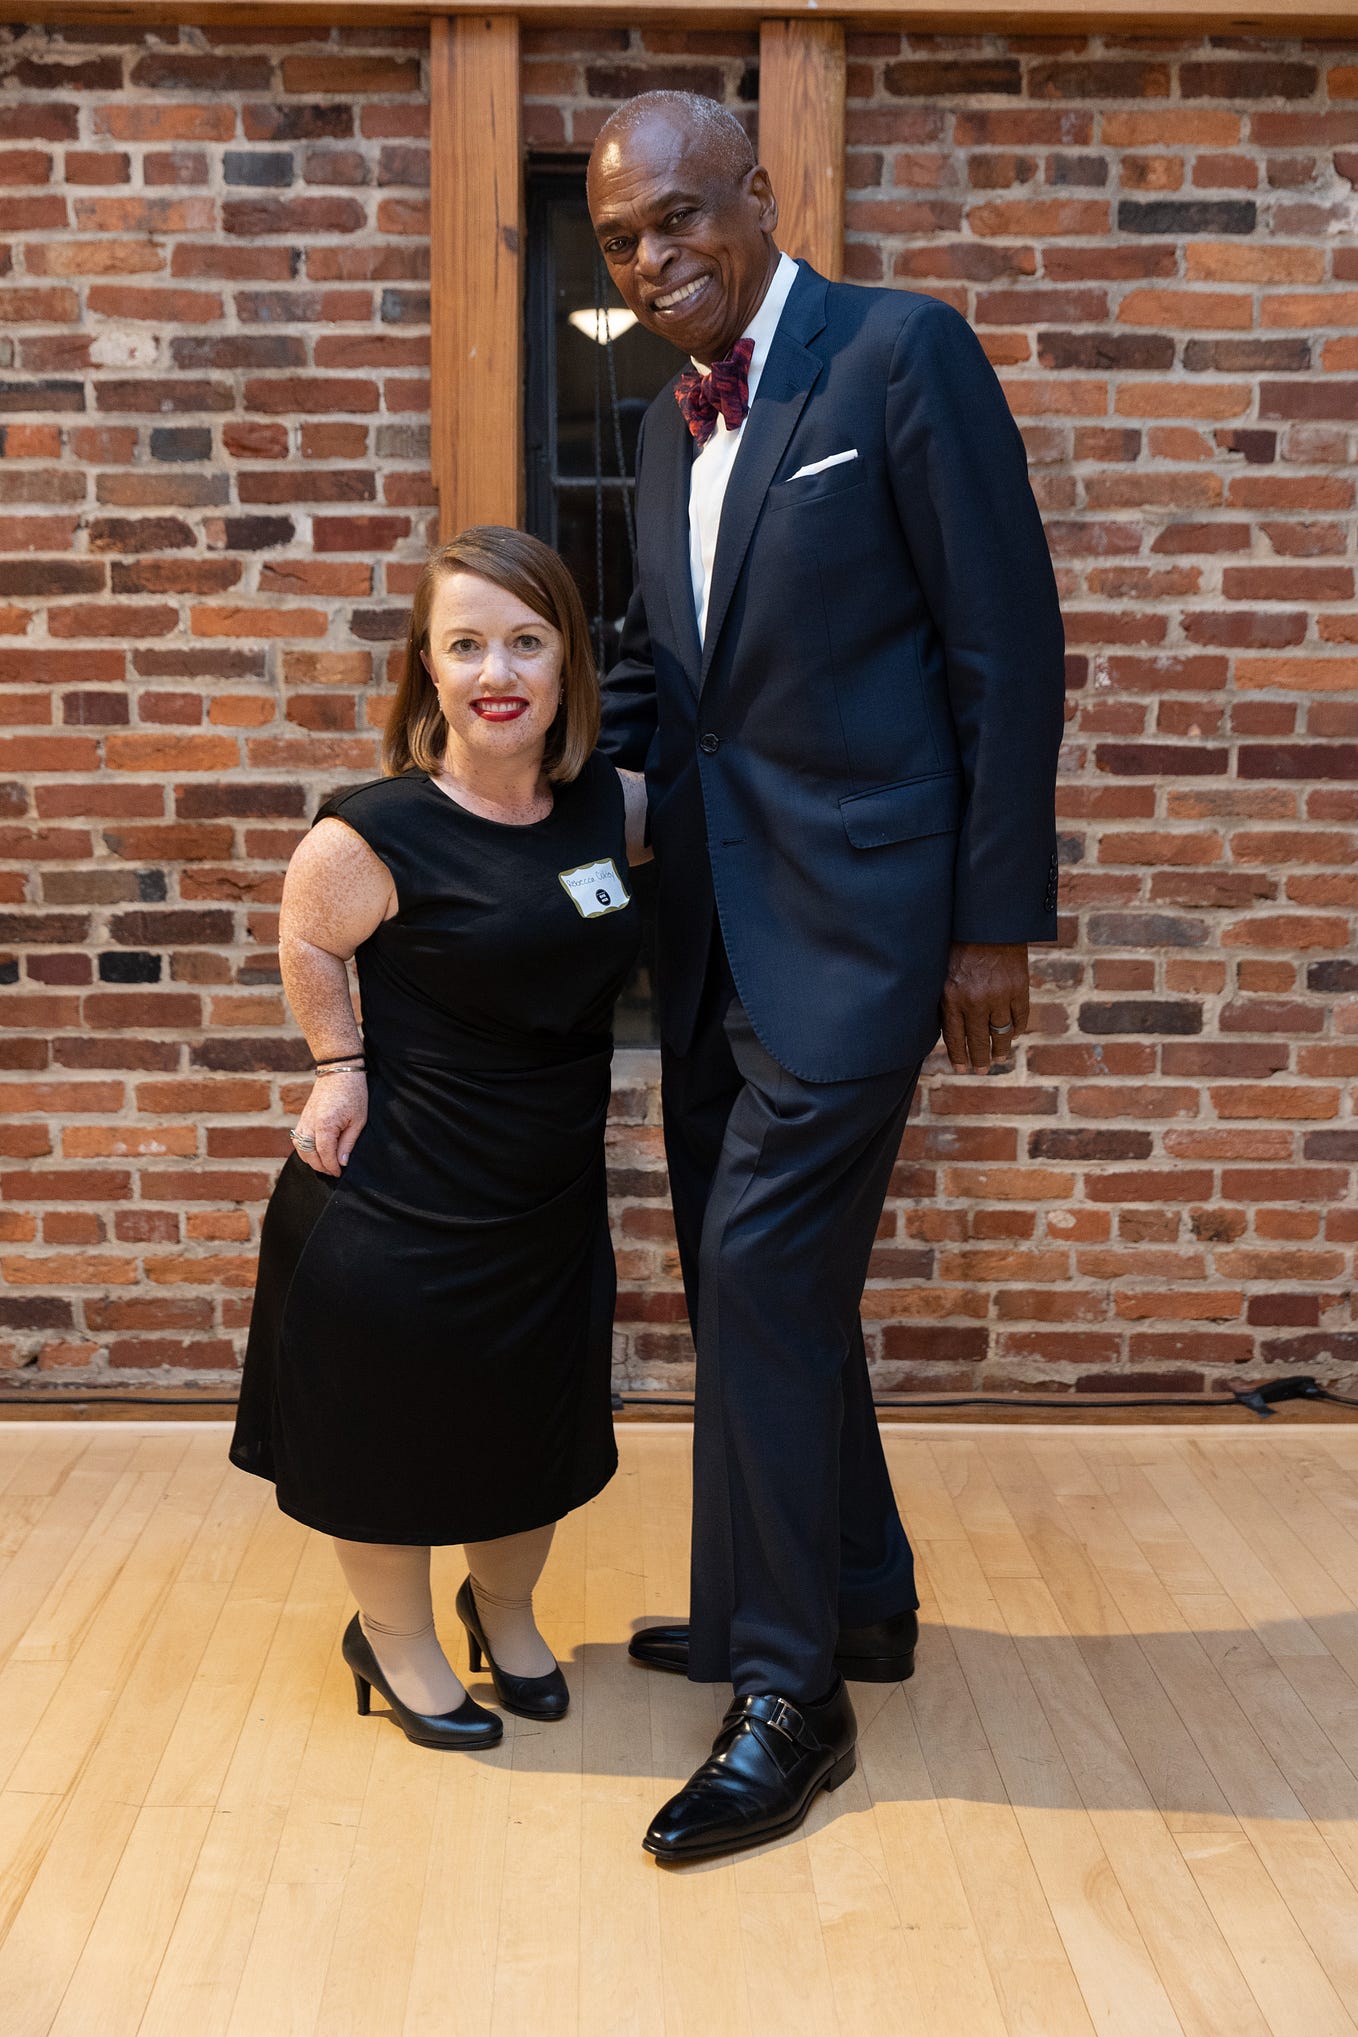 A white redheaded dwarf woman in a black dress standing next to a tall African-American man wearing a blue suit.